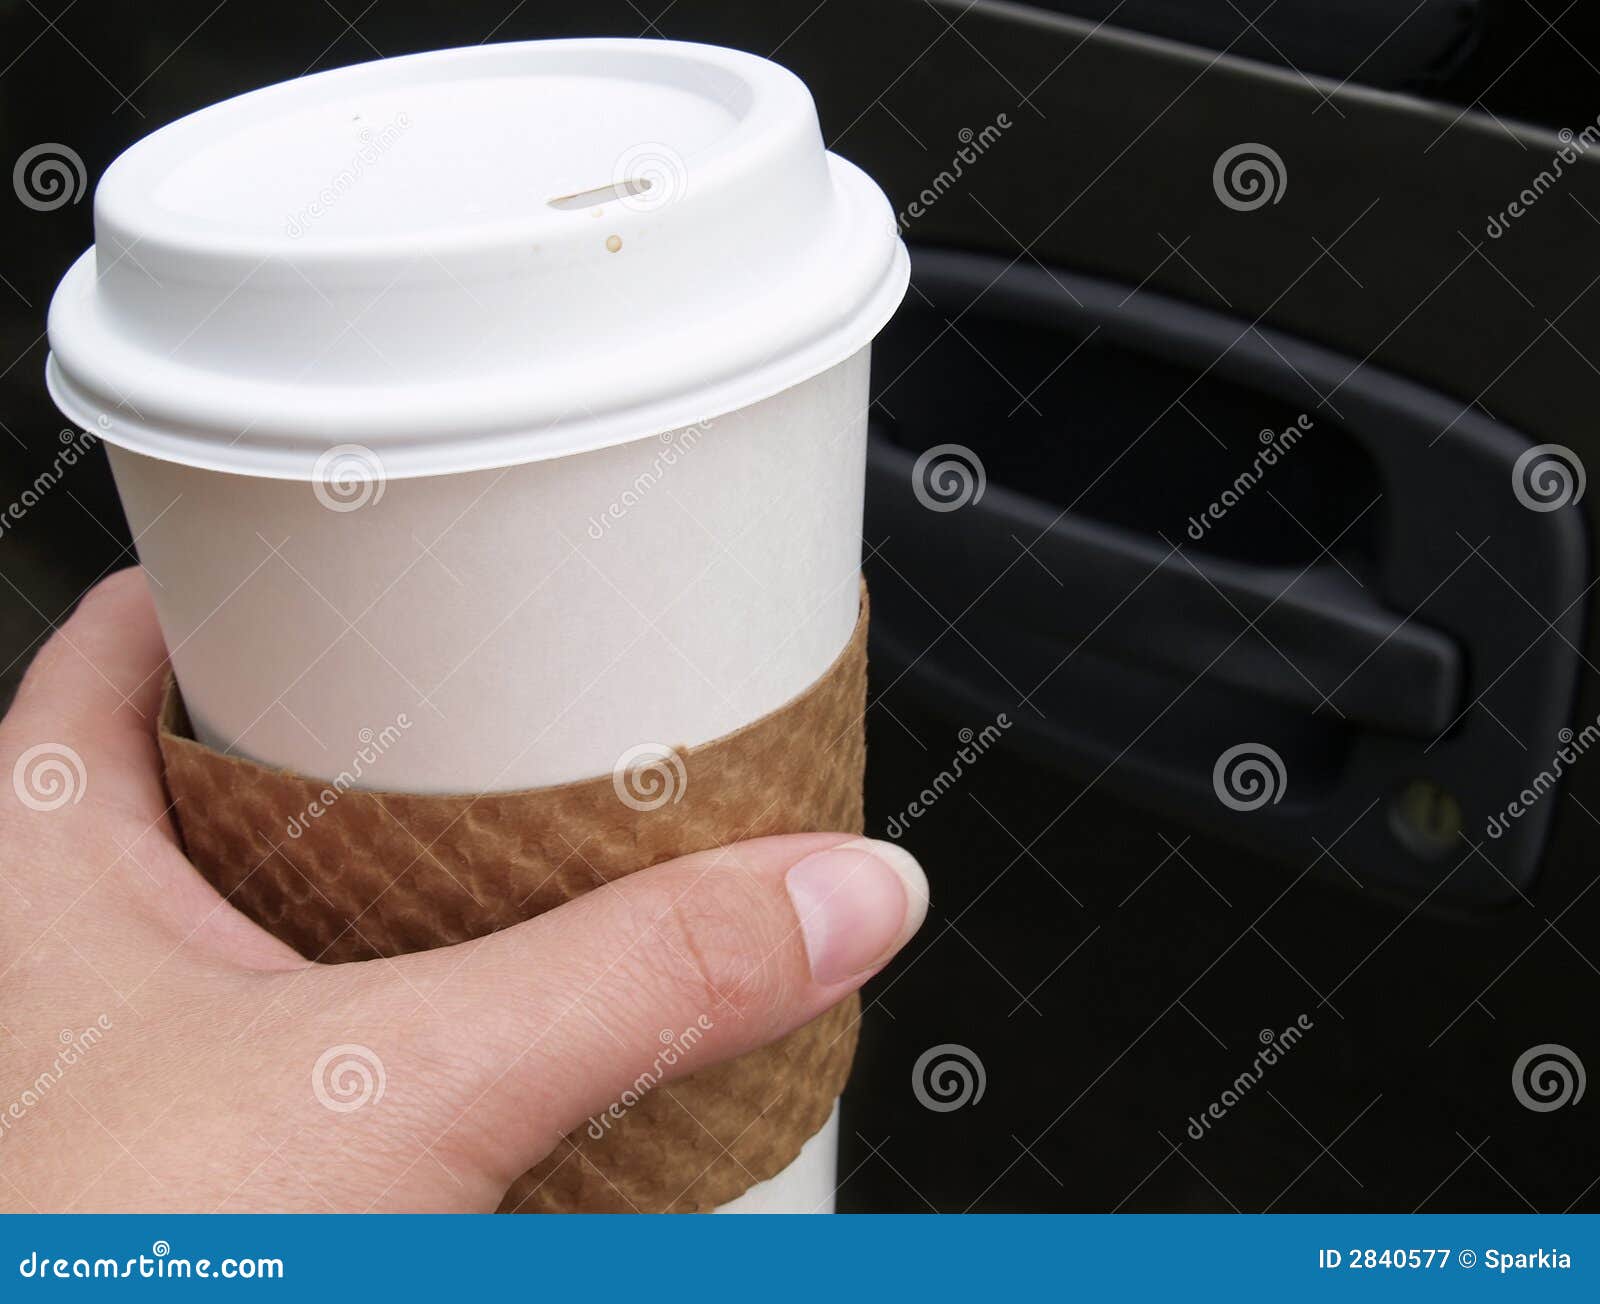 1,028 Coffee Cup Holder Car Royalty-Free Photos and Stock Images